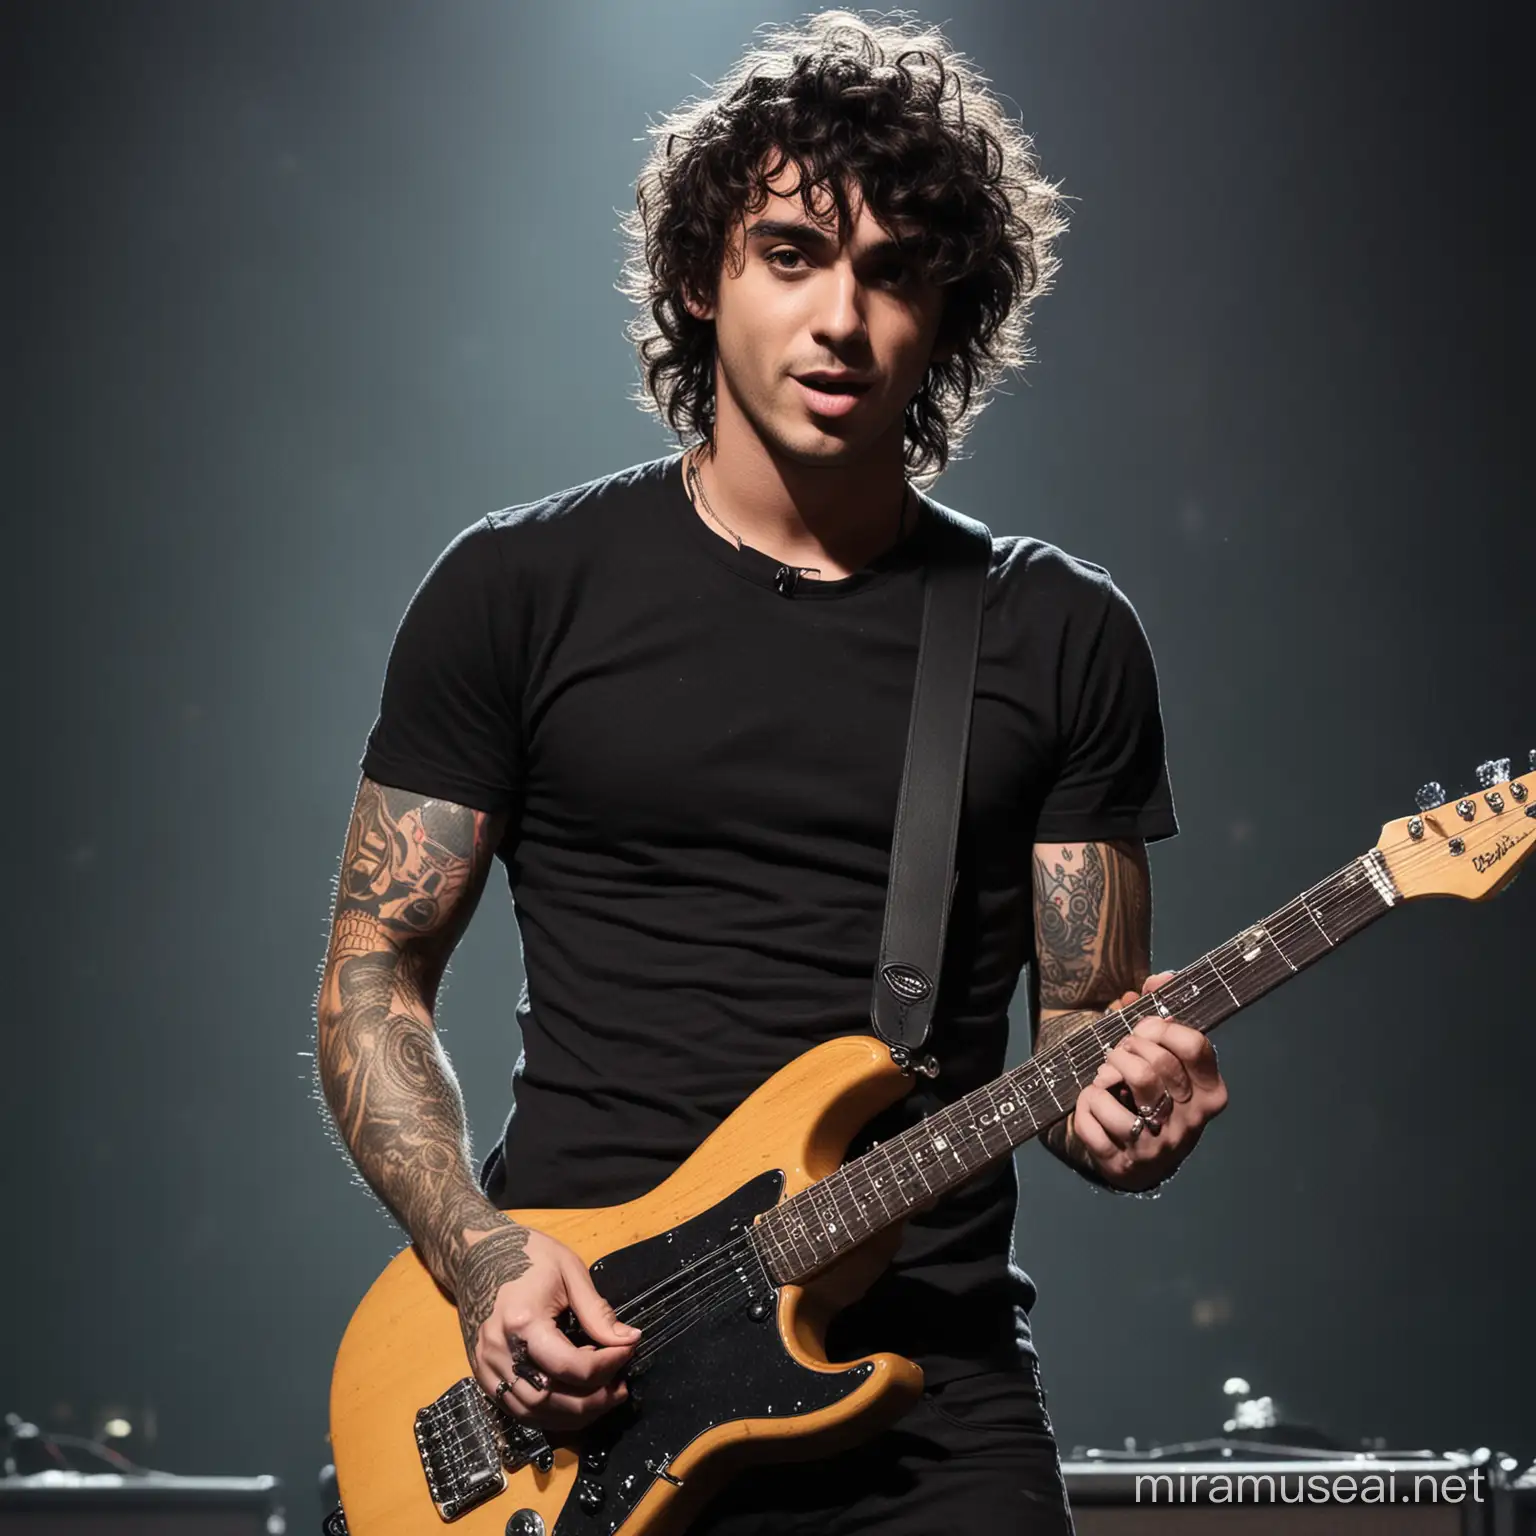 Charismatic Rock Band Frontman with Dark Curls and Muscular Build Performing on Stage